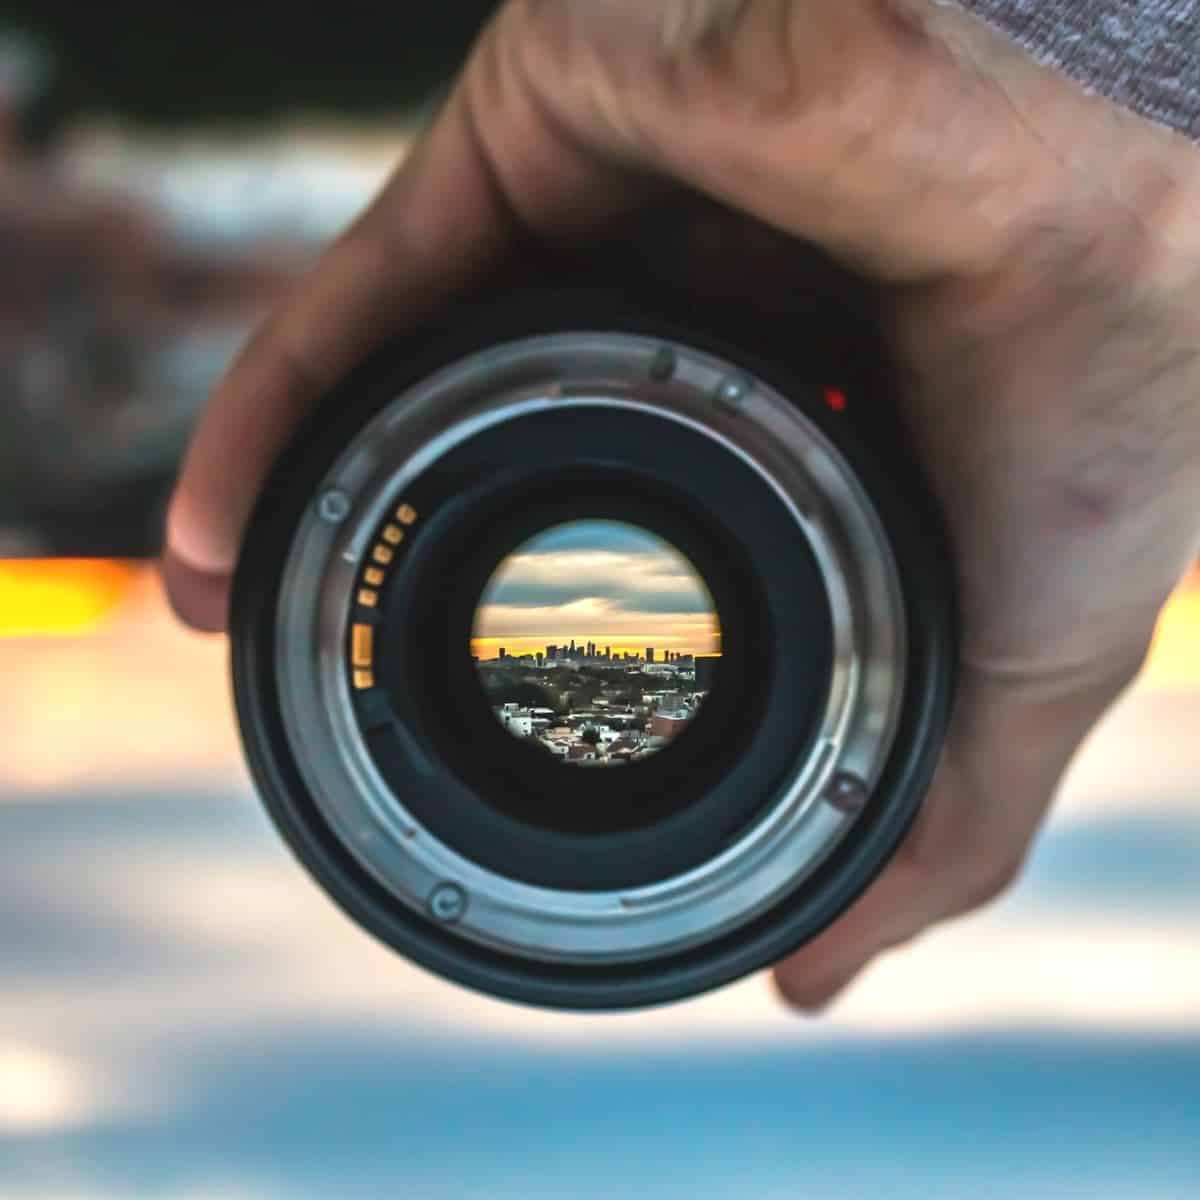 Hand holding a camera lens showing a sunset and city skyline.